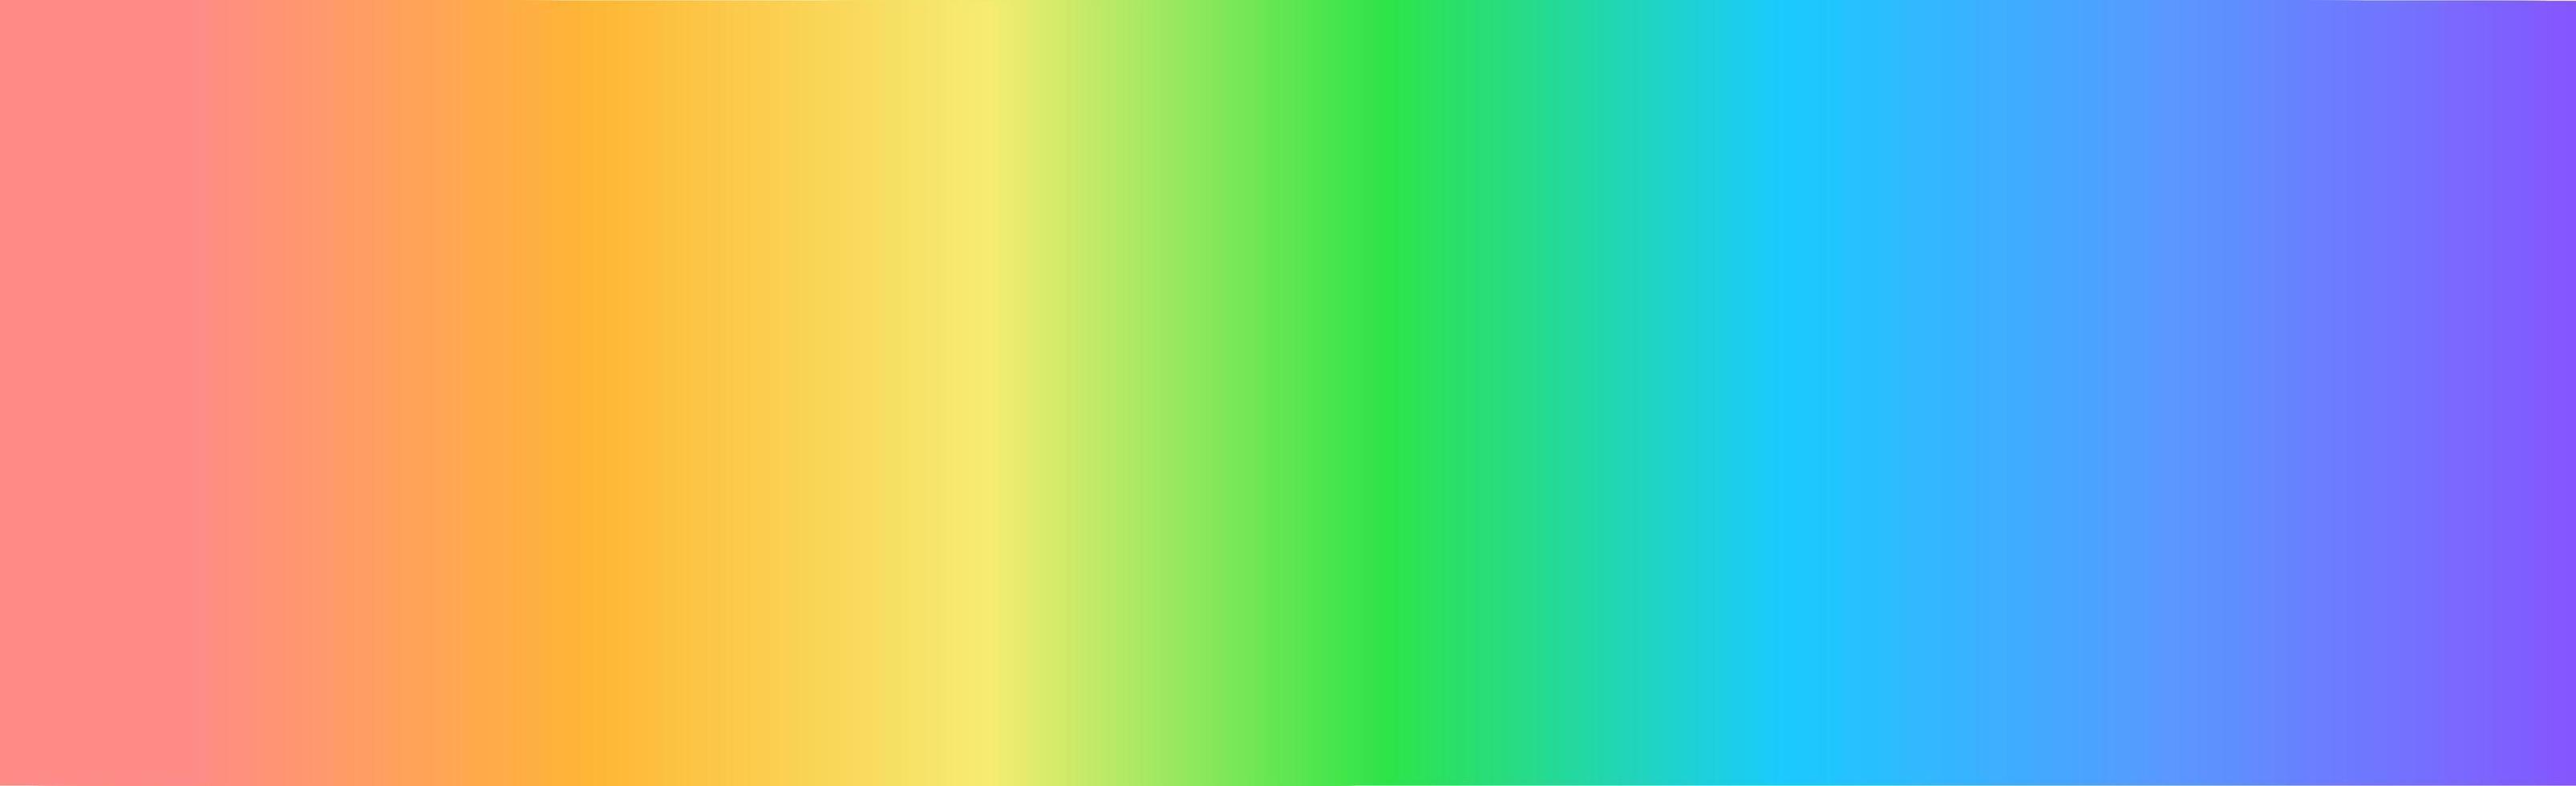 Panoramic colorful gradient rainbow web background template - Vector